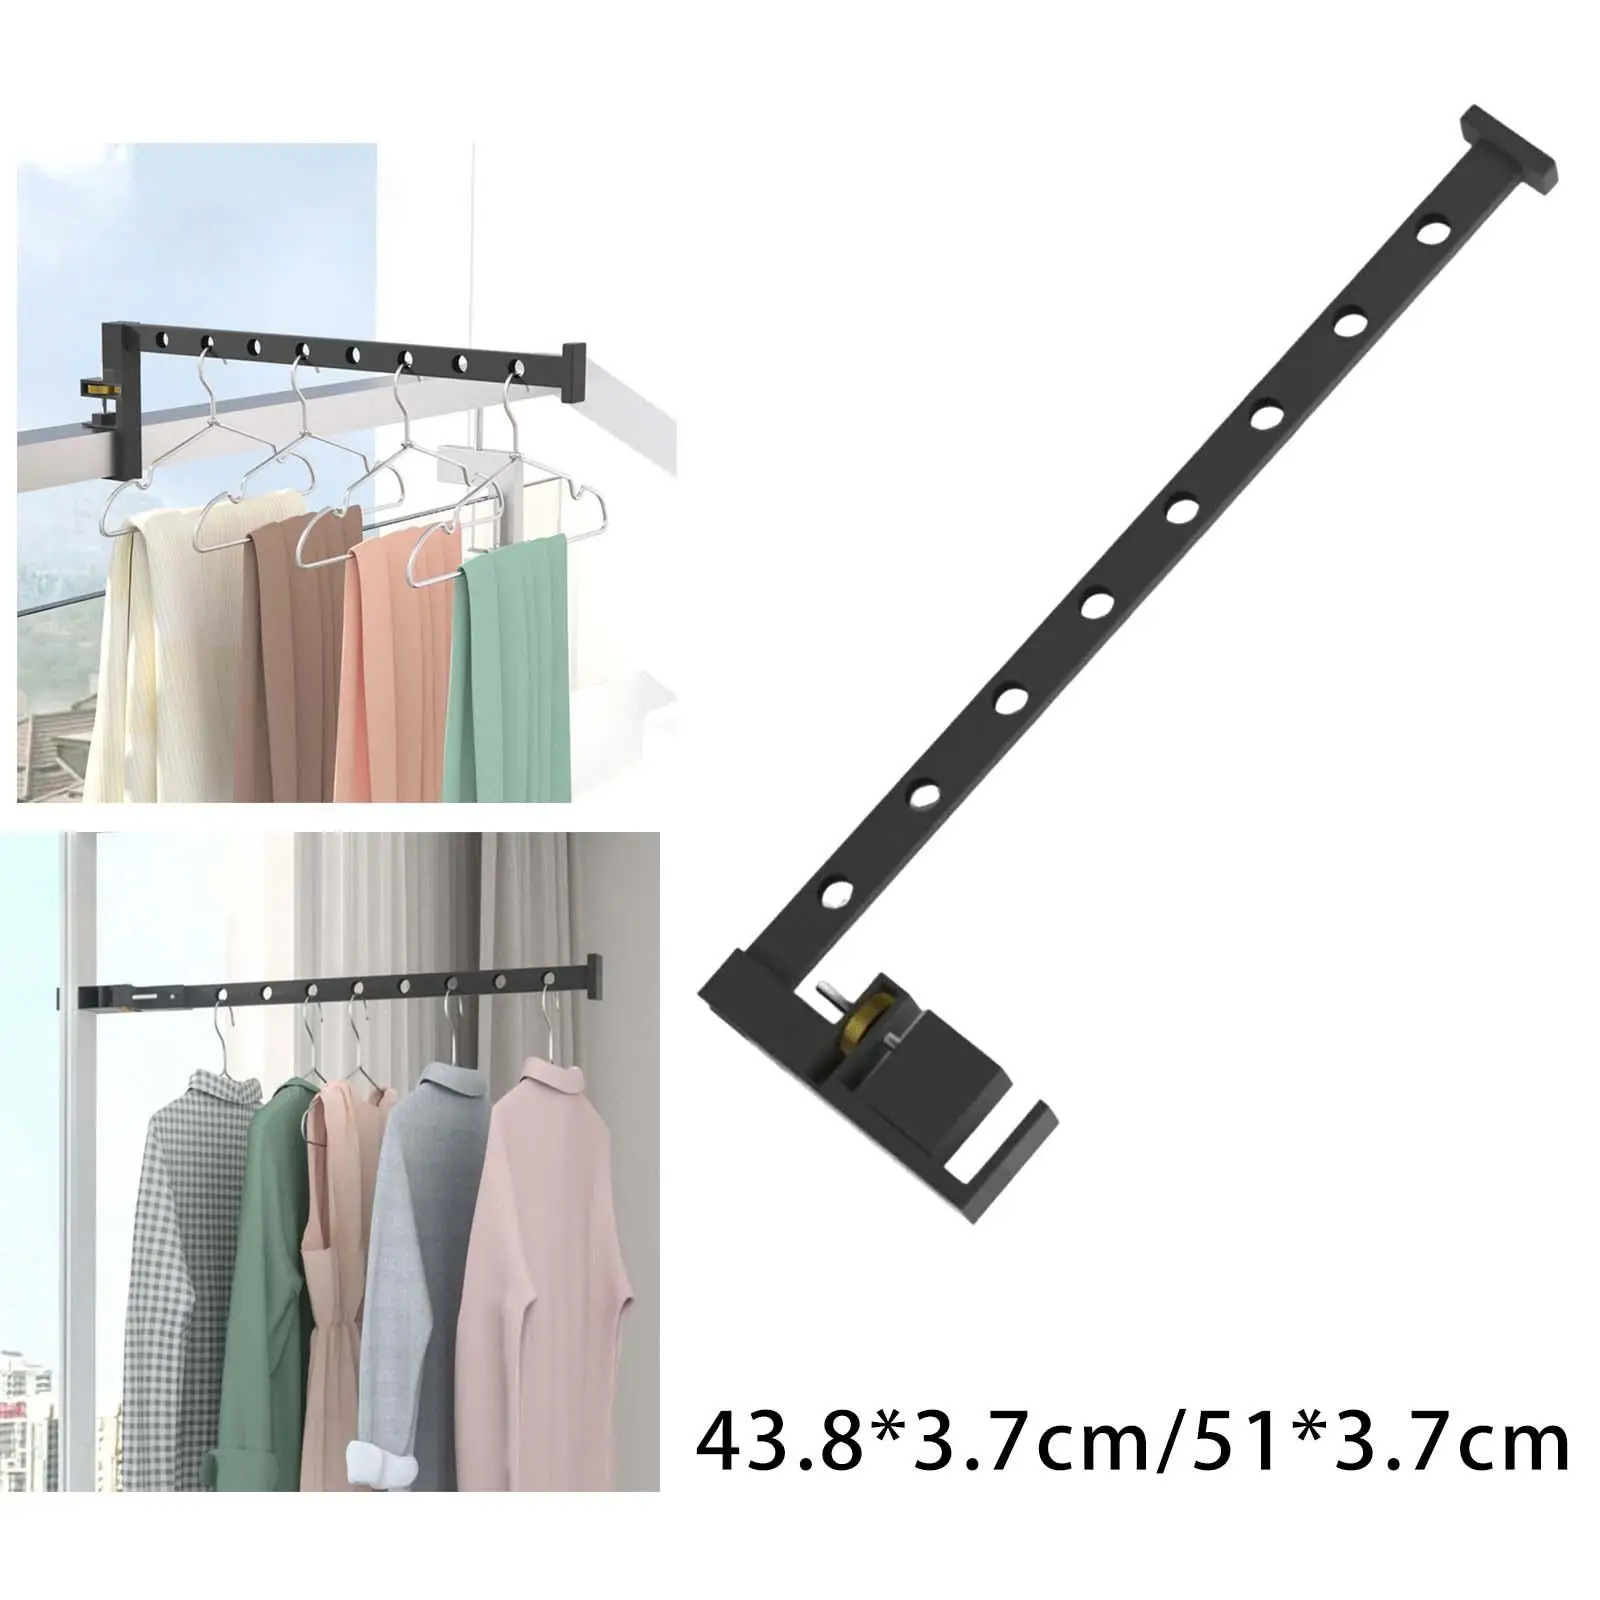 Folding Clothes Hanger Durable Punch Free Large Space Wall Mounted Clothes Hanger for Window Wall Trousers Kids Clothes Jackets